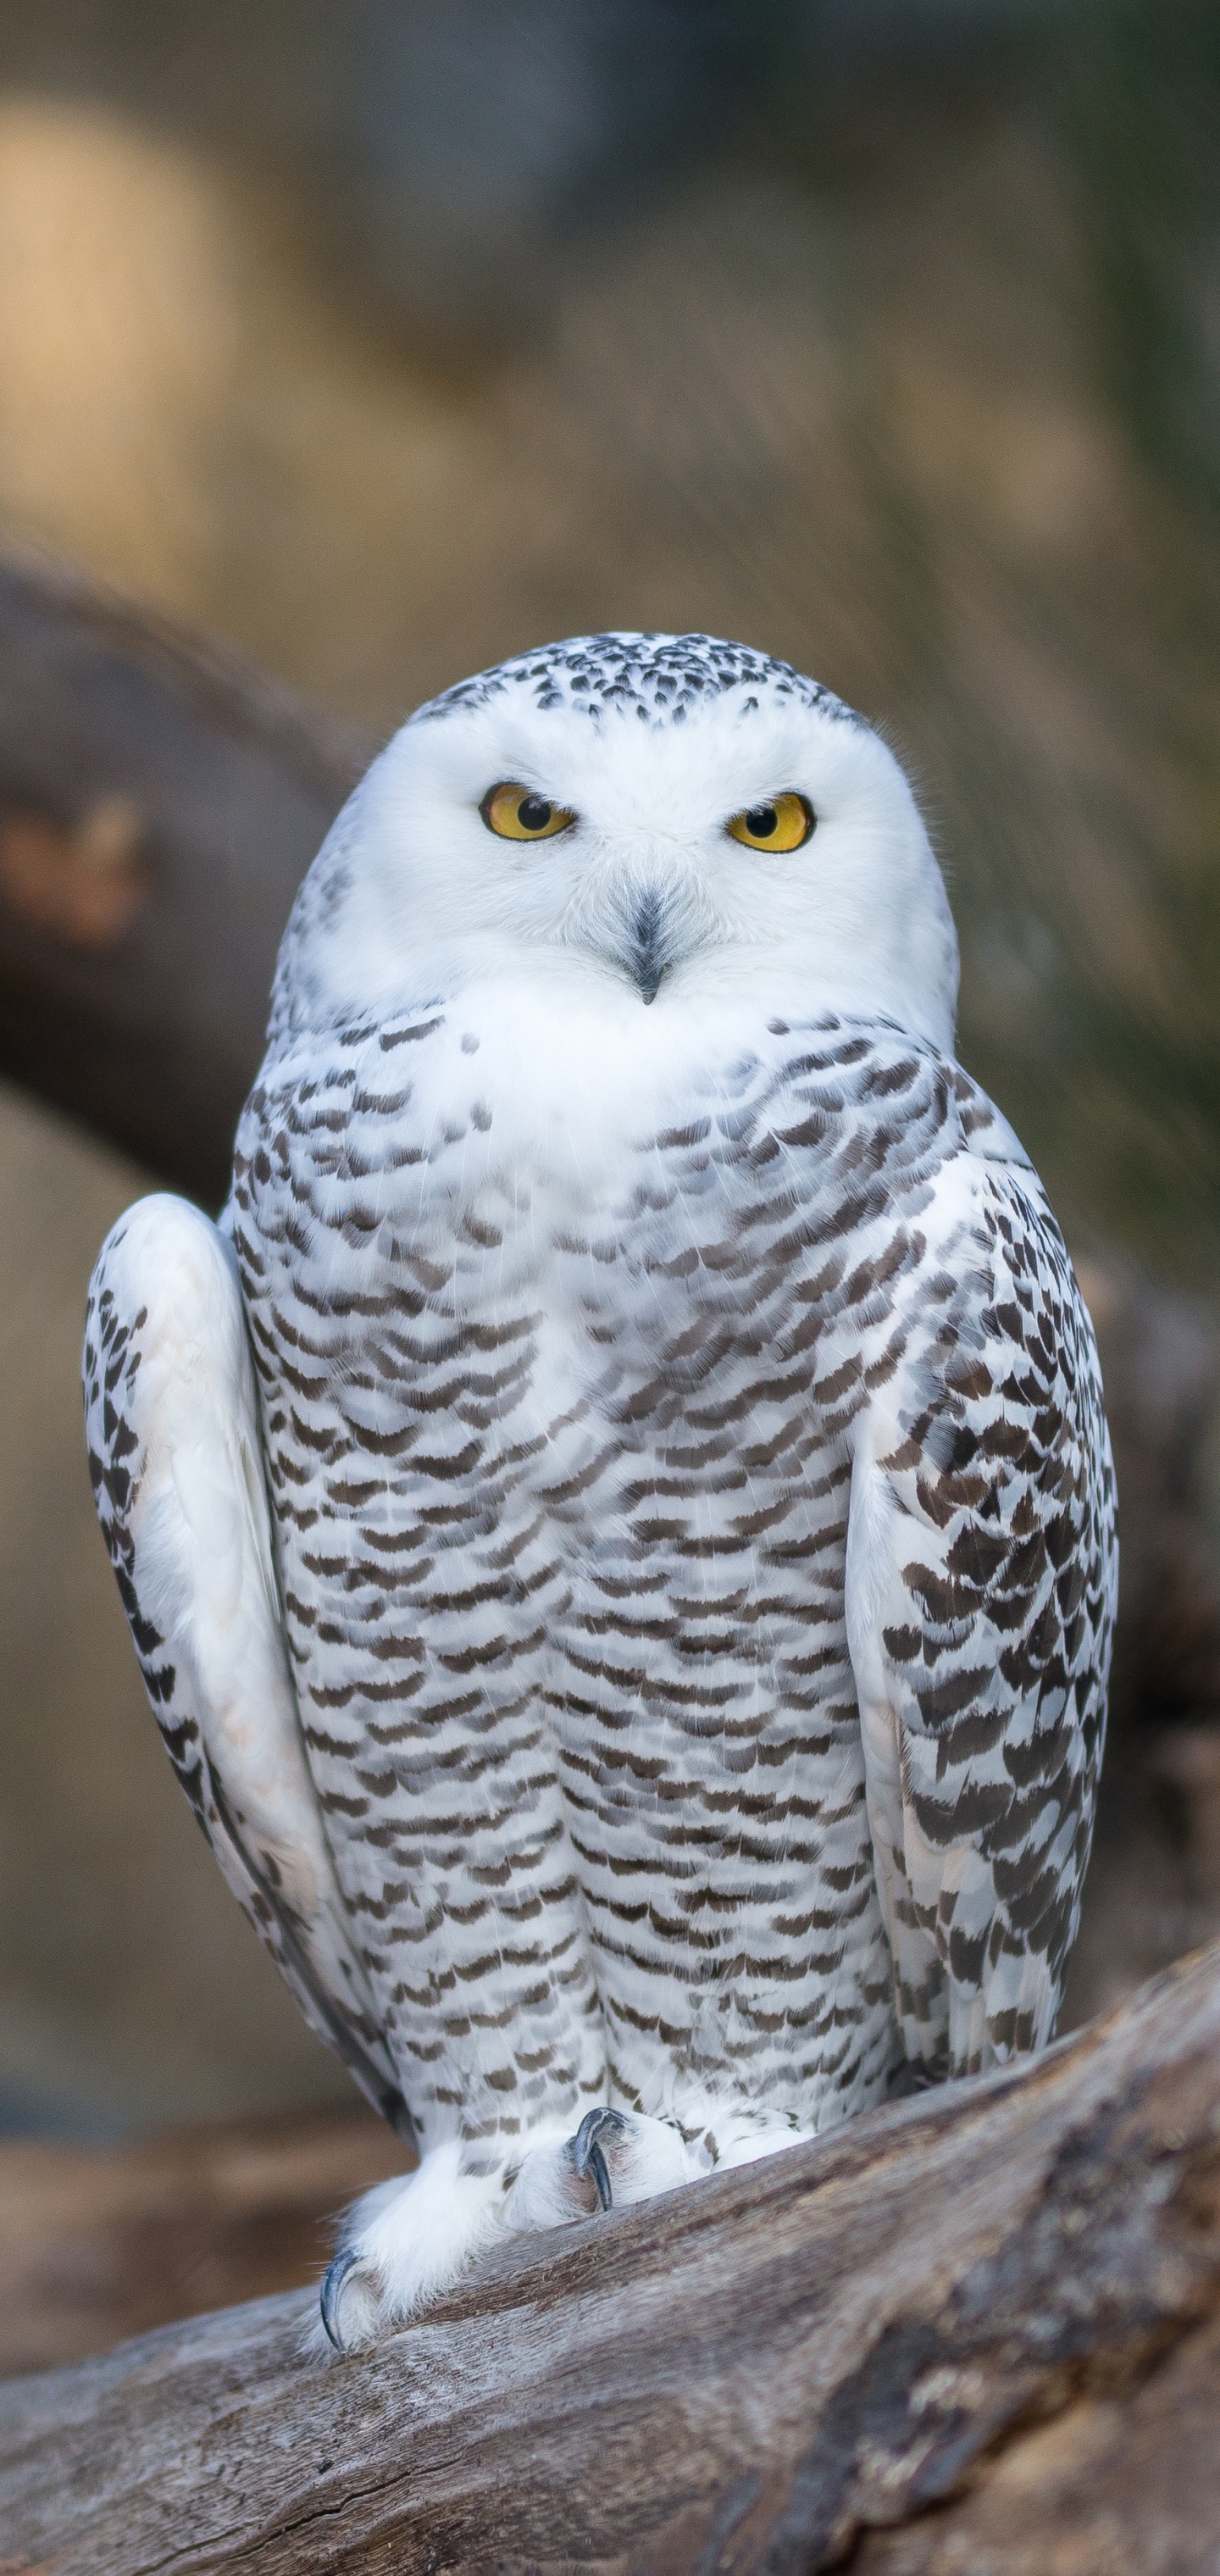 Snowy Owl Phone Wallpaper - Mobile Abyss